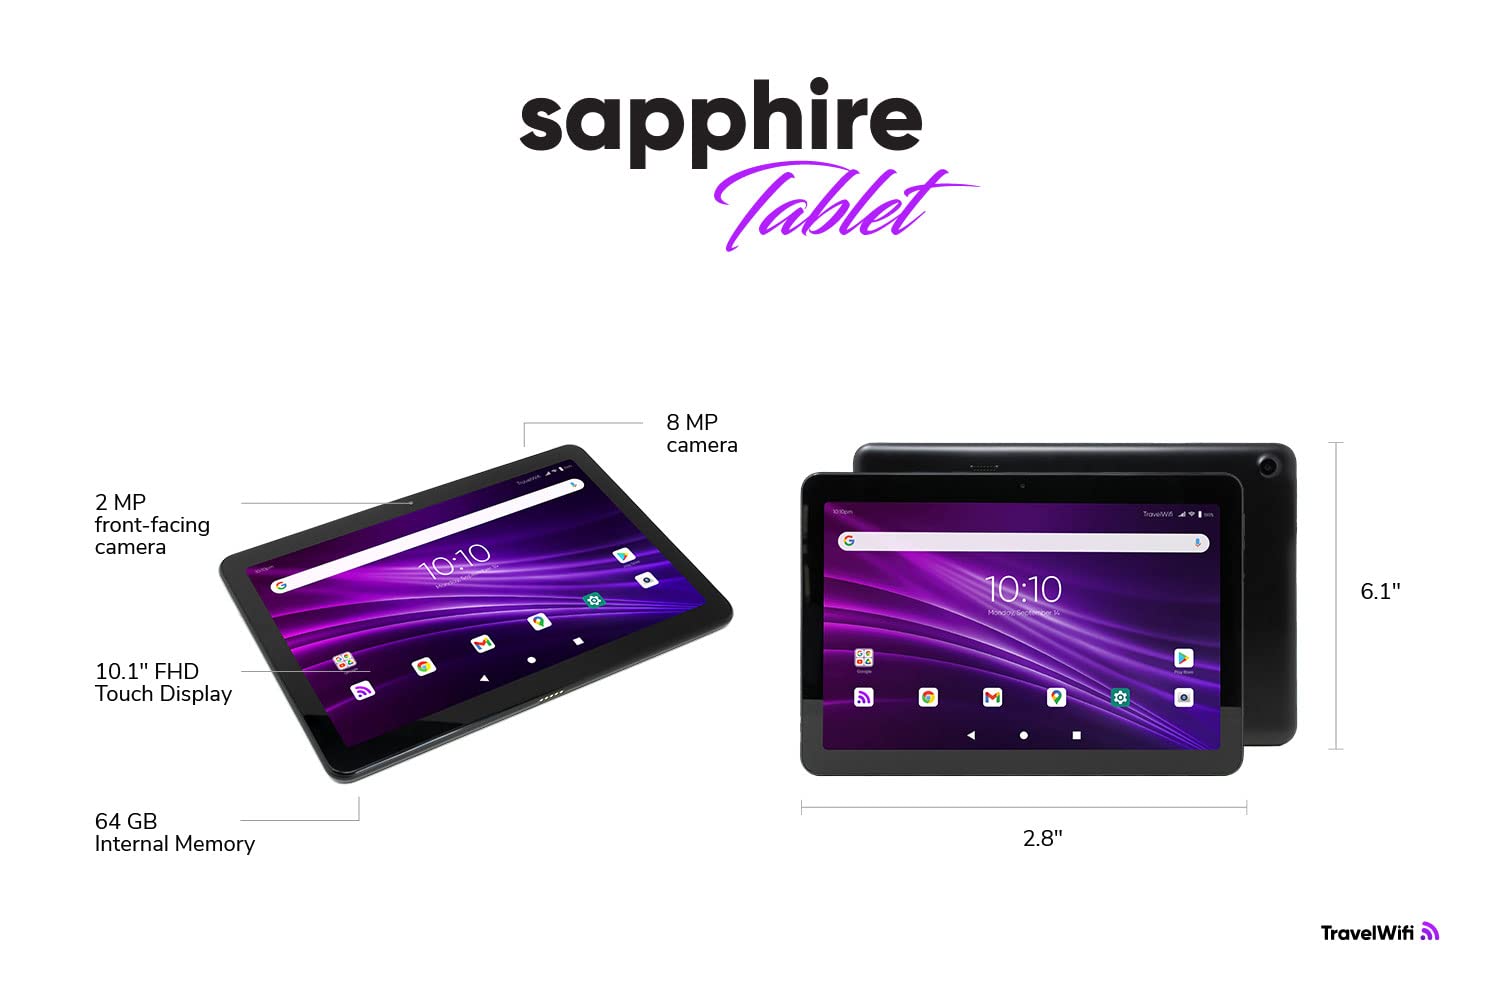 TravelWifi Sapphire Tablet Mobile Hotspot, 10.1" Full HD Touch Screen, Portable WiFi Hotspot for Travel in 130+ Countries, Preloaded 3GB Free Global Data, CloudSIM Technology